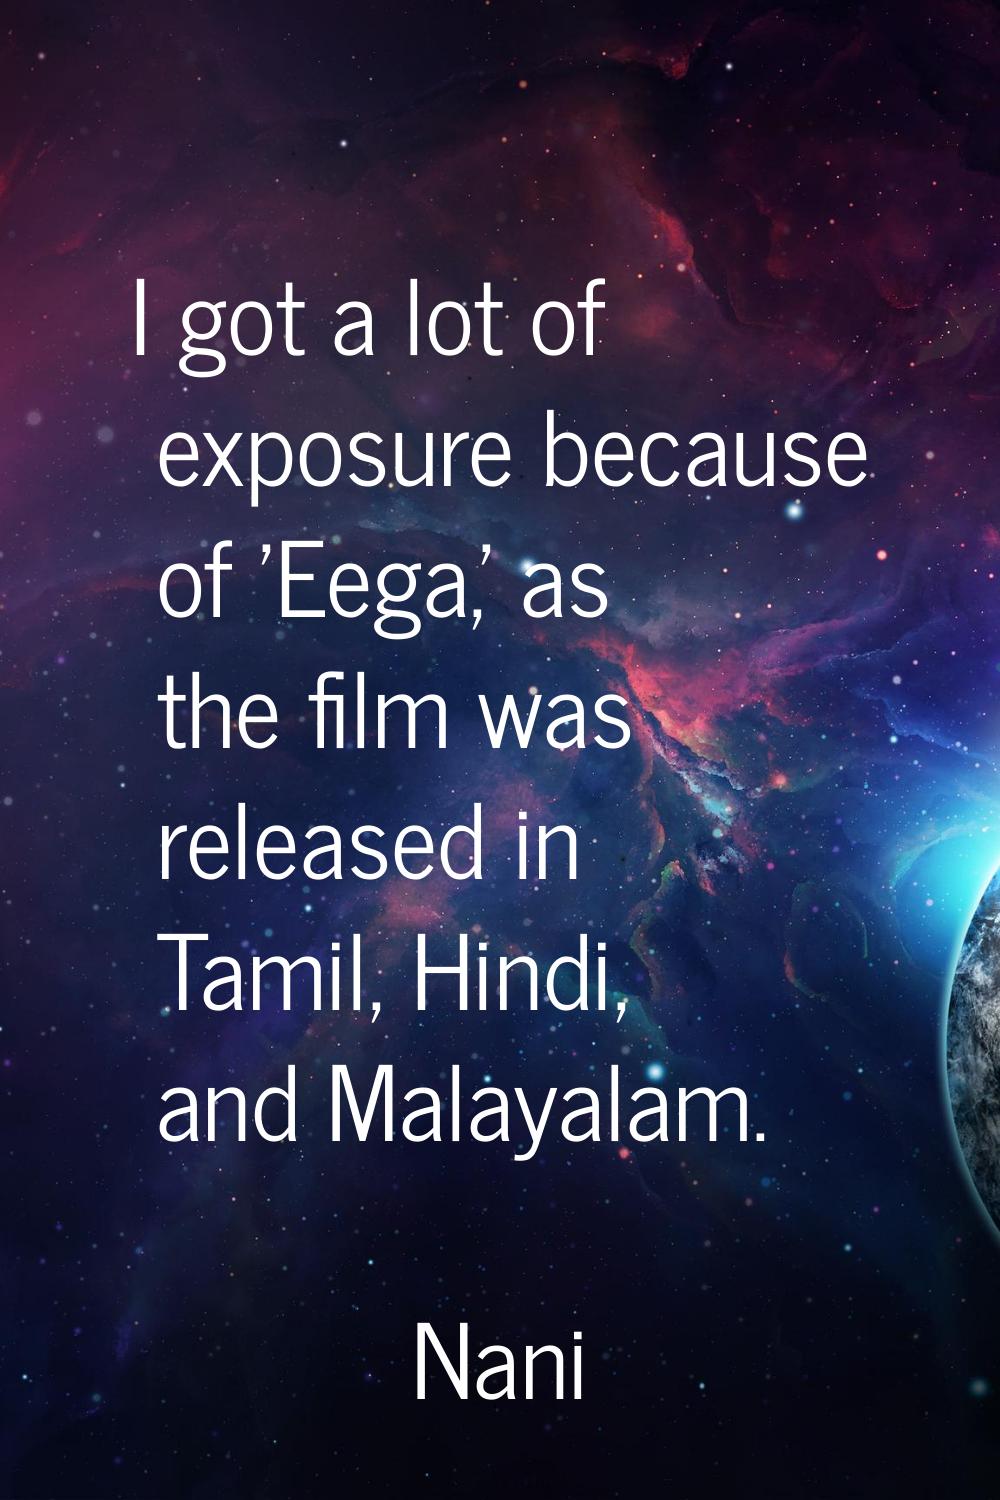 I got a lot of exposure because of 'Eega,' as the film was released in Tamil, Hindi, and Malayalam.